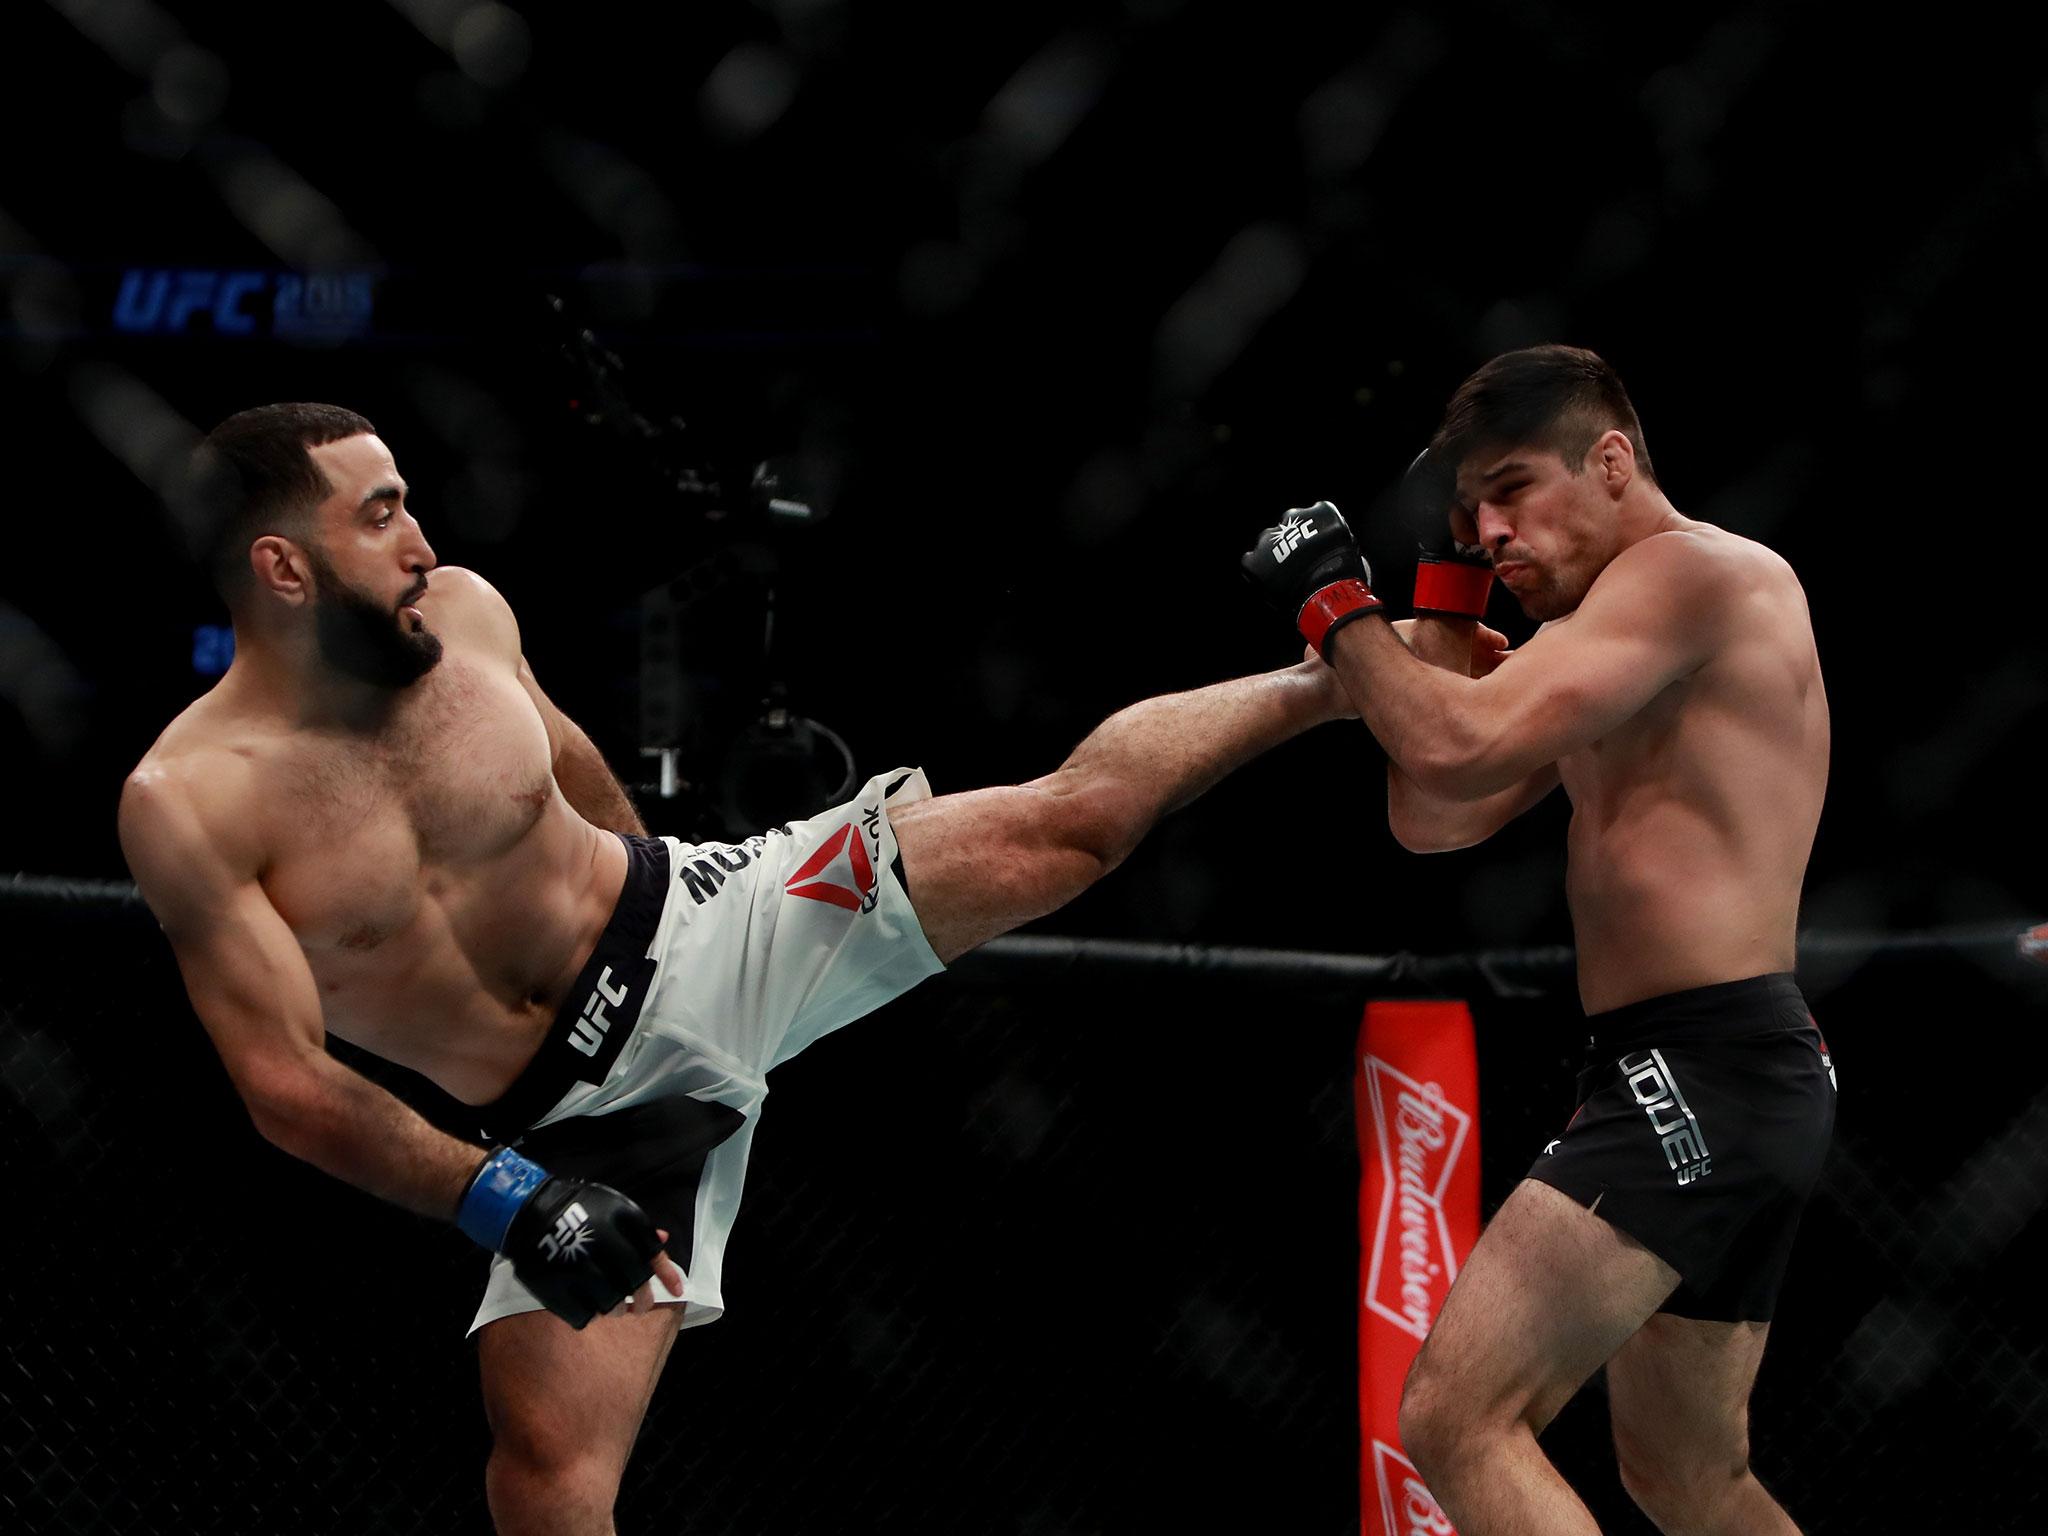 Vicente Luque (right) beat Belal Muhammad in their last meeting